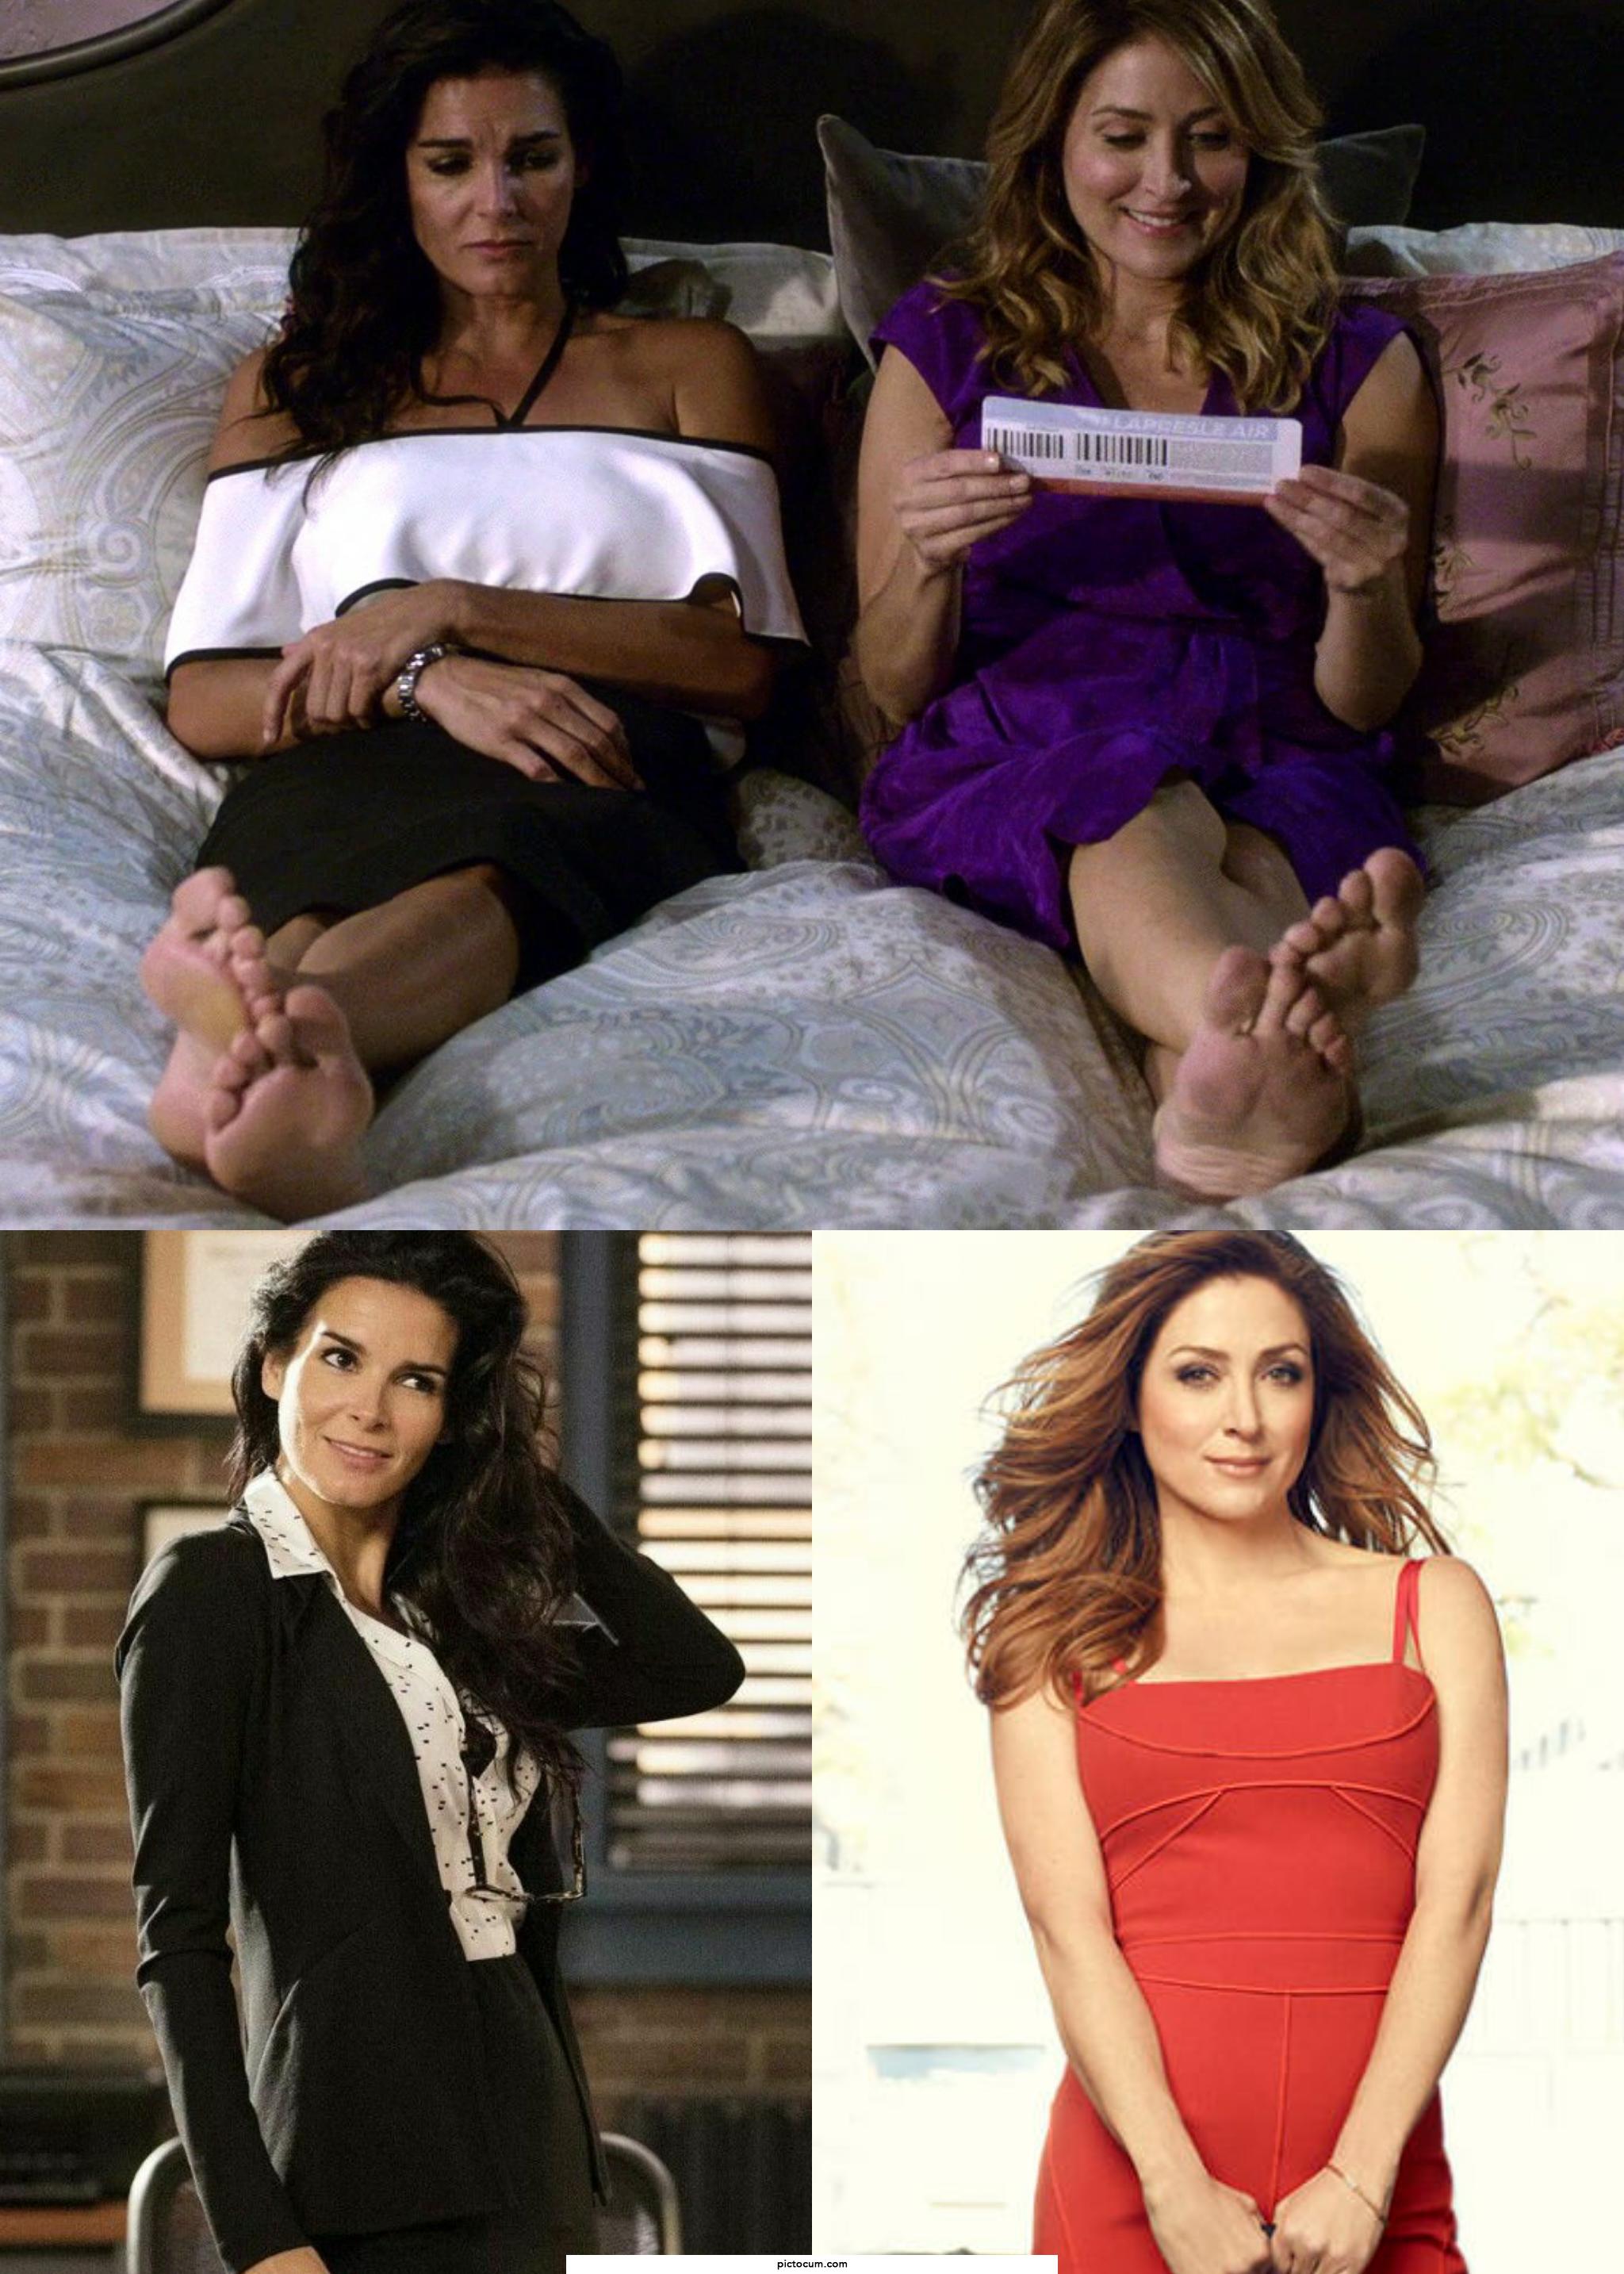 I want to spend hours worshipping Angie Harmon &amp; Sasha Alexander's feet then have an all night threesome